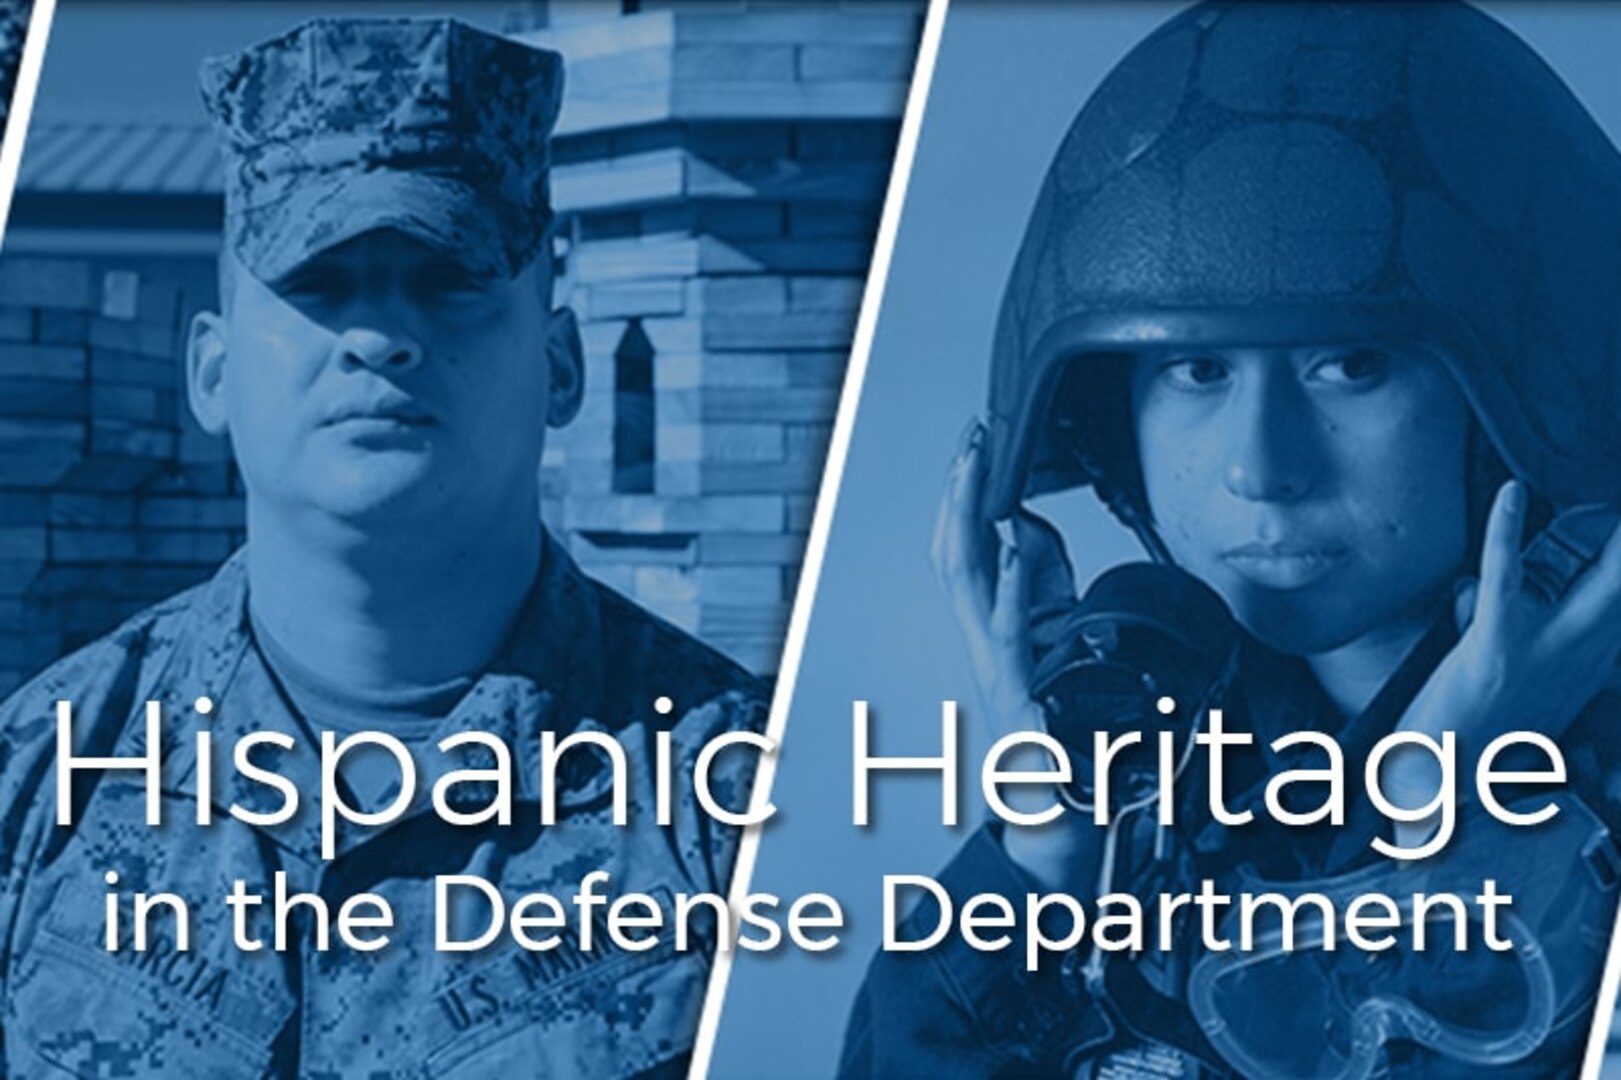 A title graphic portraying a male and a female Hispanic/Latino service member.